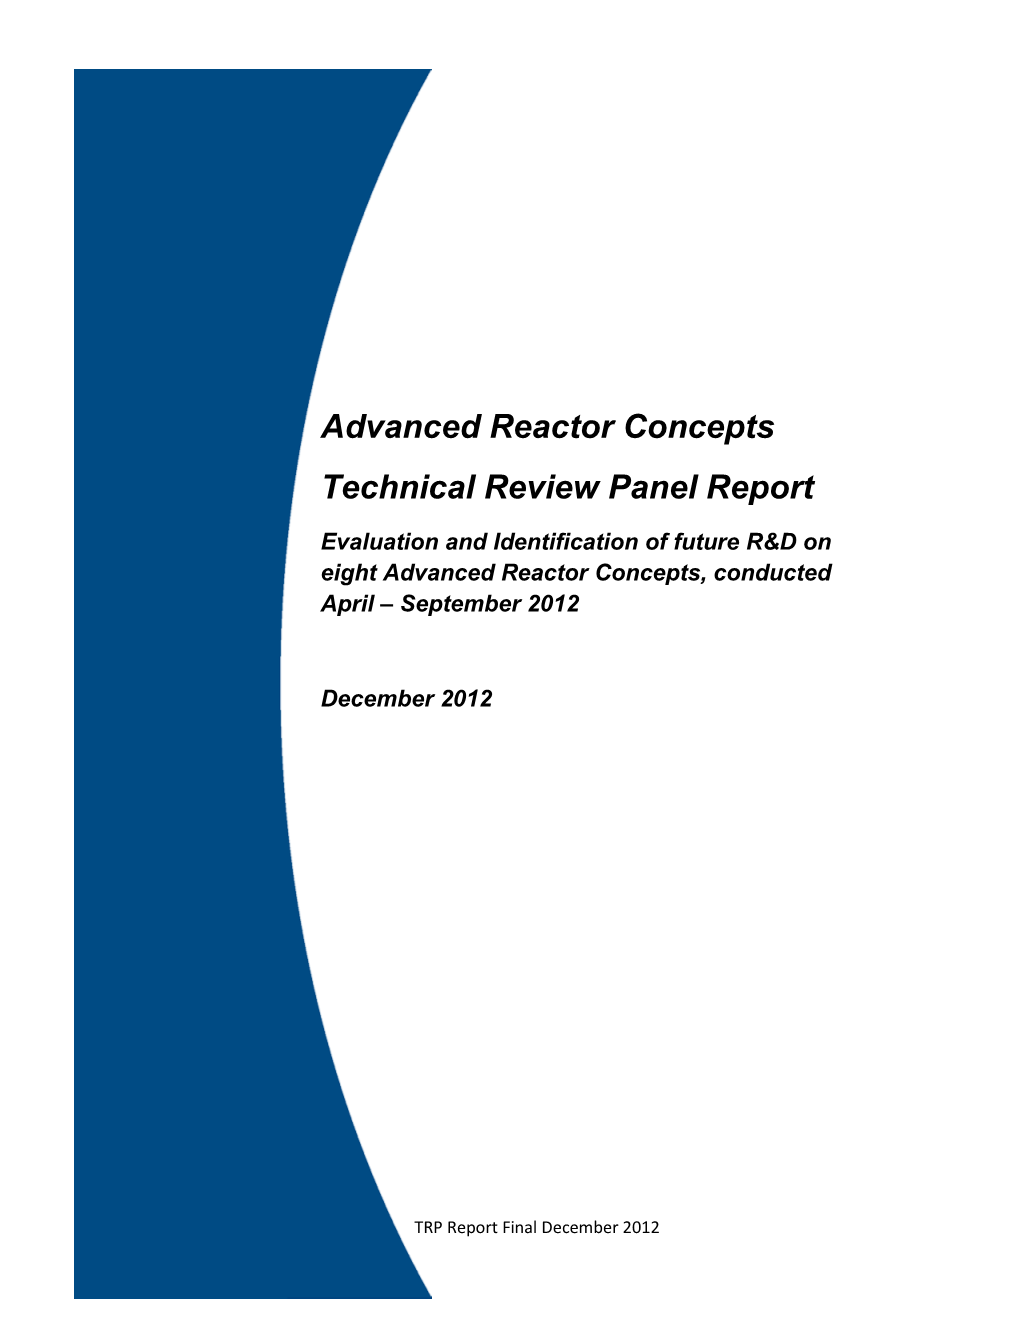 Advanced Reactor Concepts Technical Review Panel Report